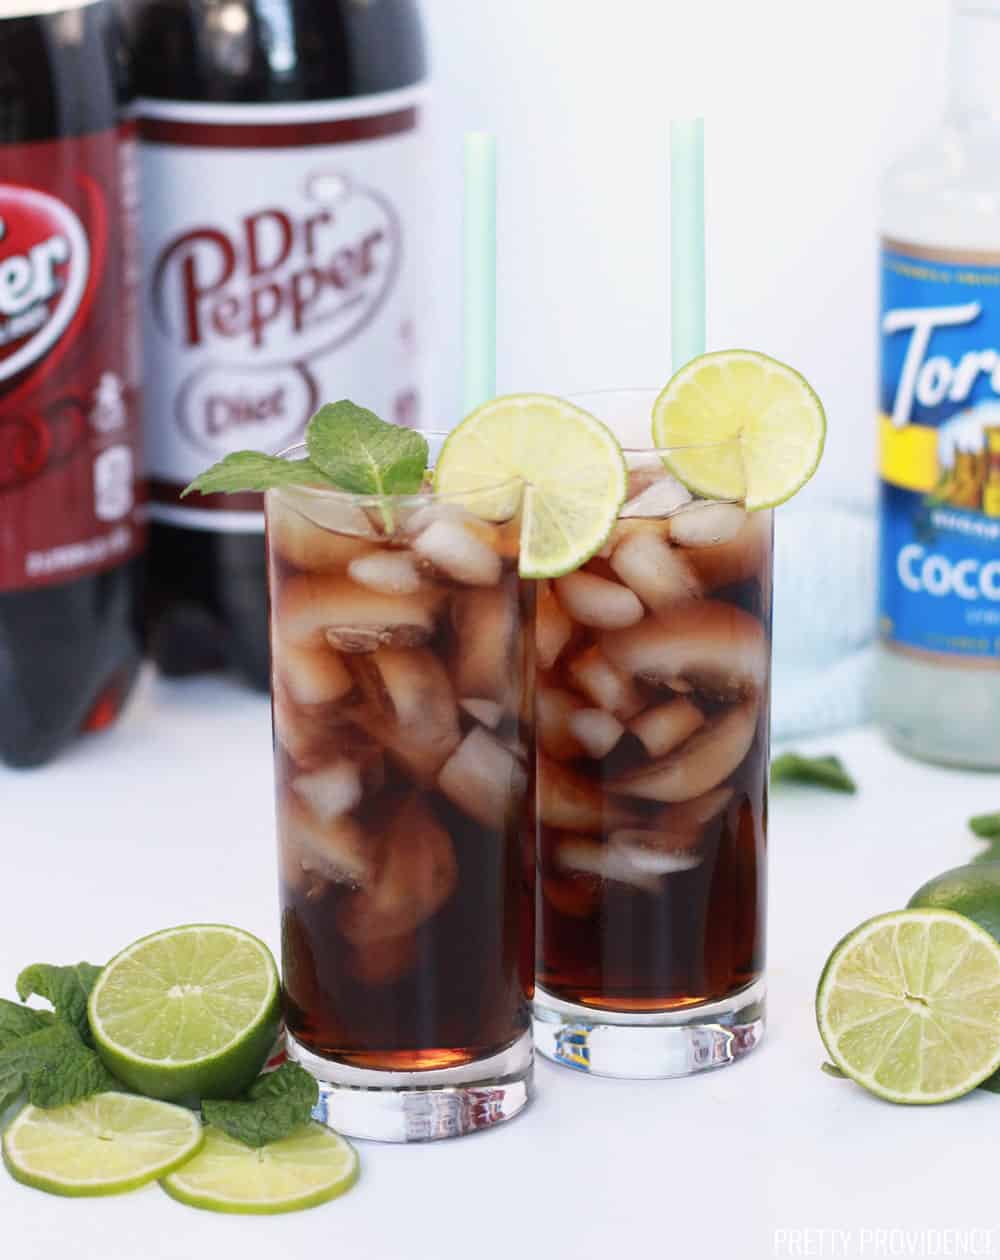 Dirty Dr. Pepper drinks with Dr. Pepper bottles and Coconut syrup in the background, lime slices and mint as garnish.